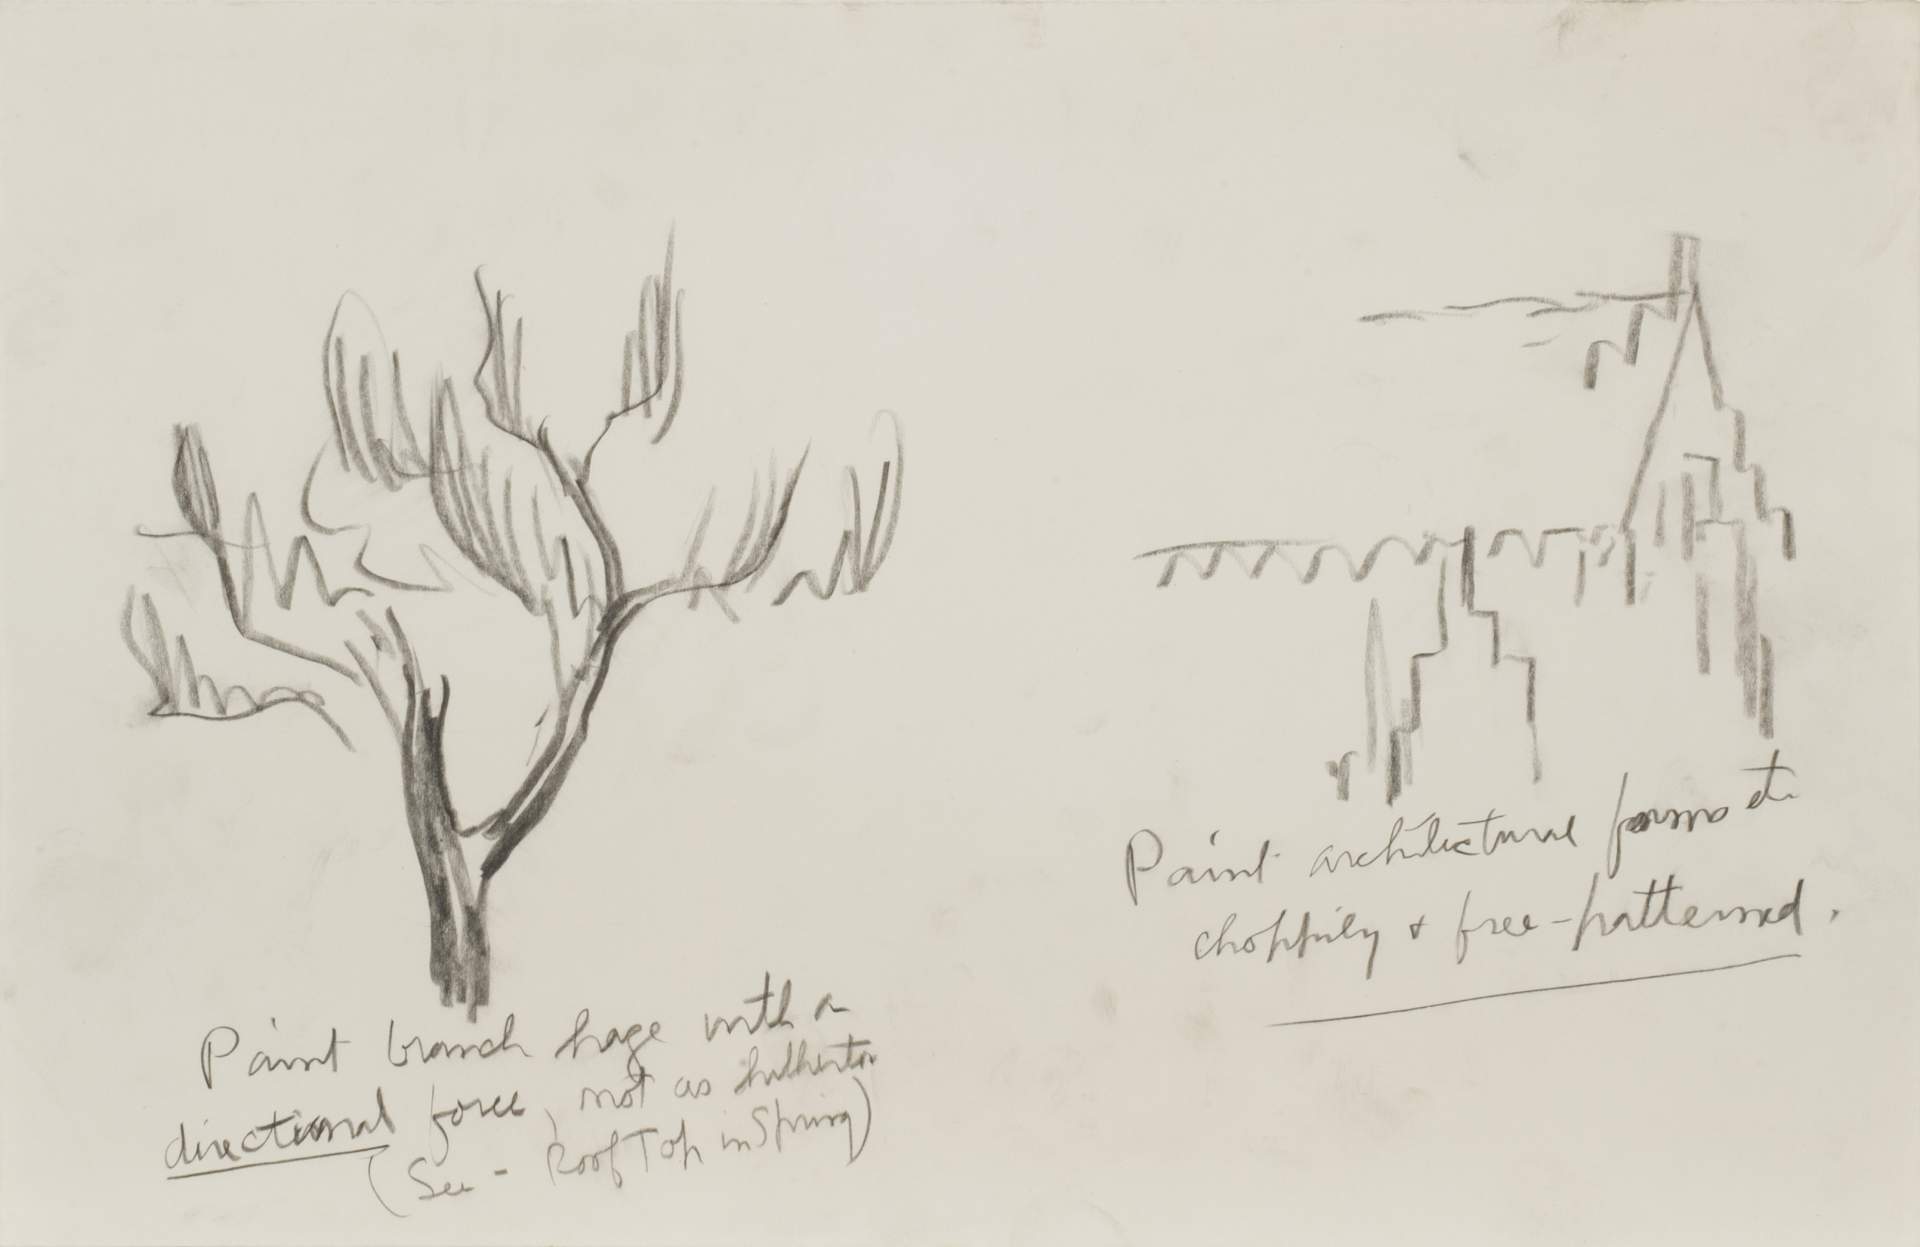 Untitled study with notation, "Paint branch haze with a directional force, not as hitherto (See - Untitled Roof Top in Spring)